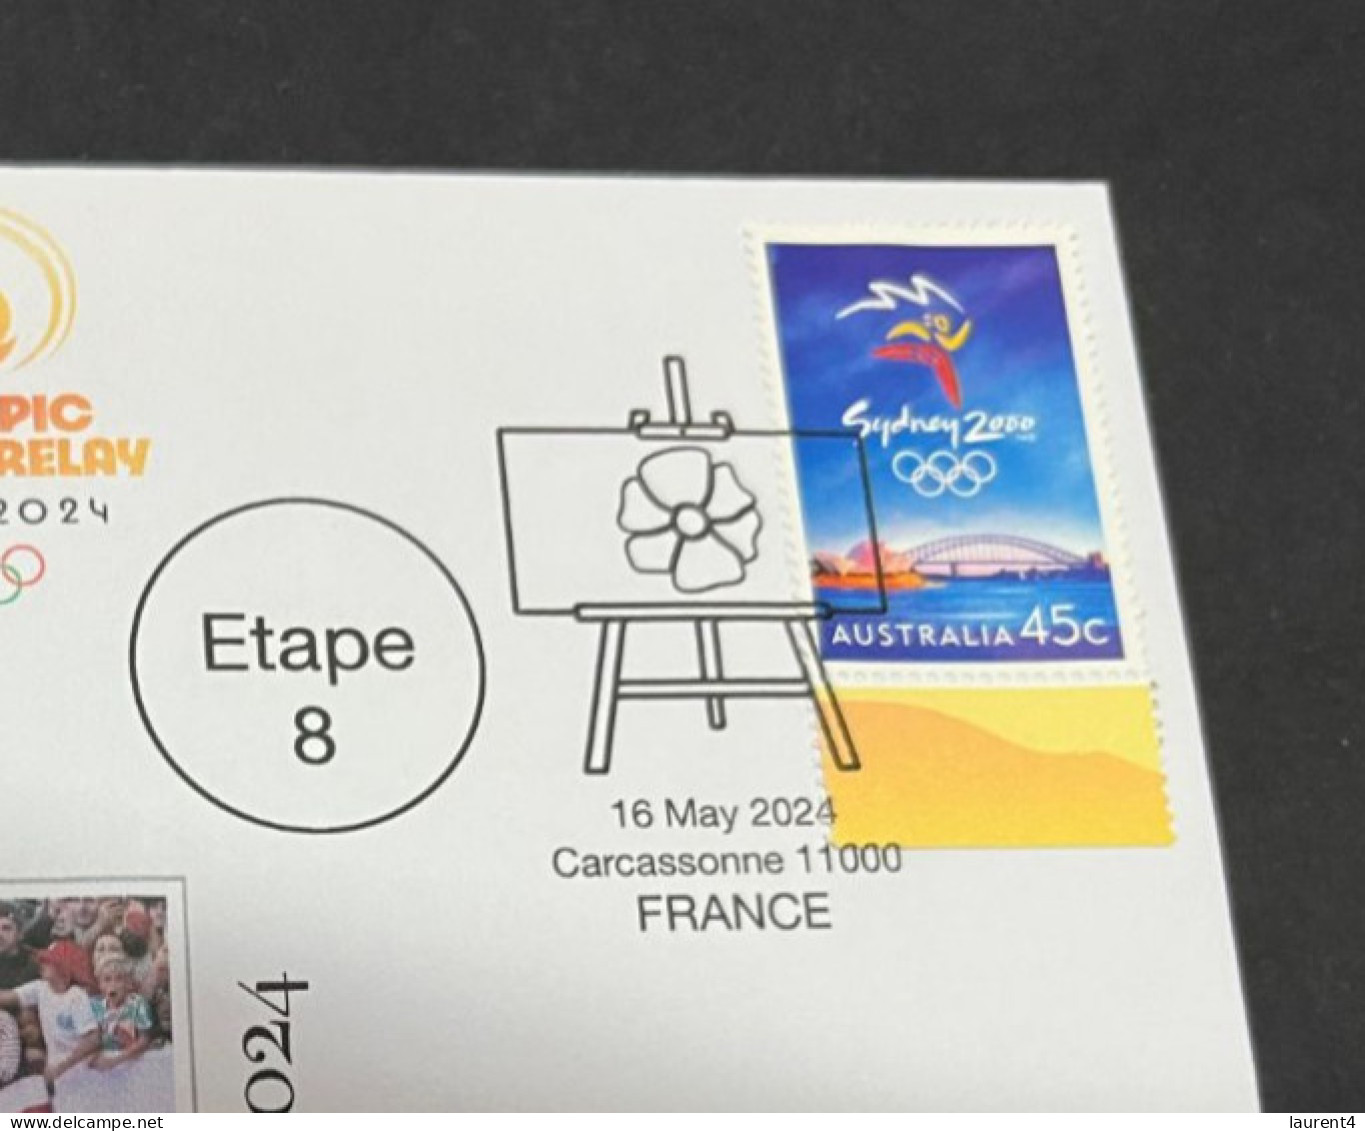 17-5-2024 (5 Z 17) Paris Olympic Games 2024 - Torch Relay (Etape 8) In Carcassonne (16-5-2024) With OLYMPIC Stamp - Verano 2024 : París